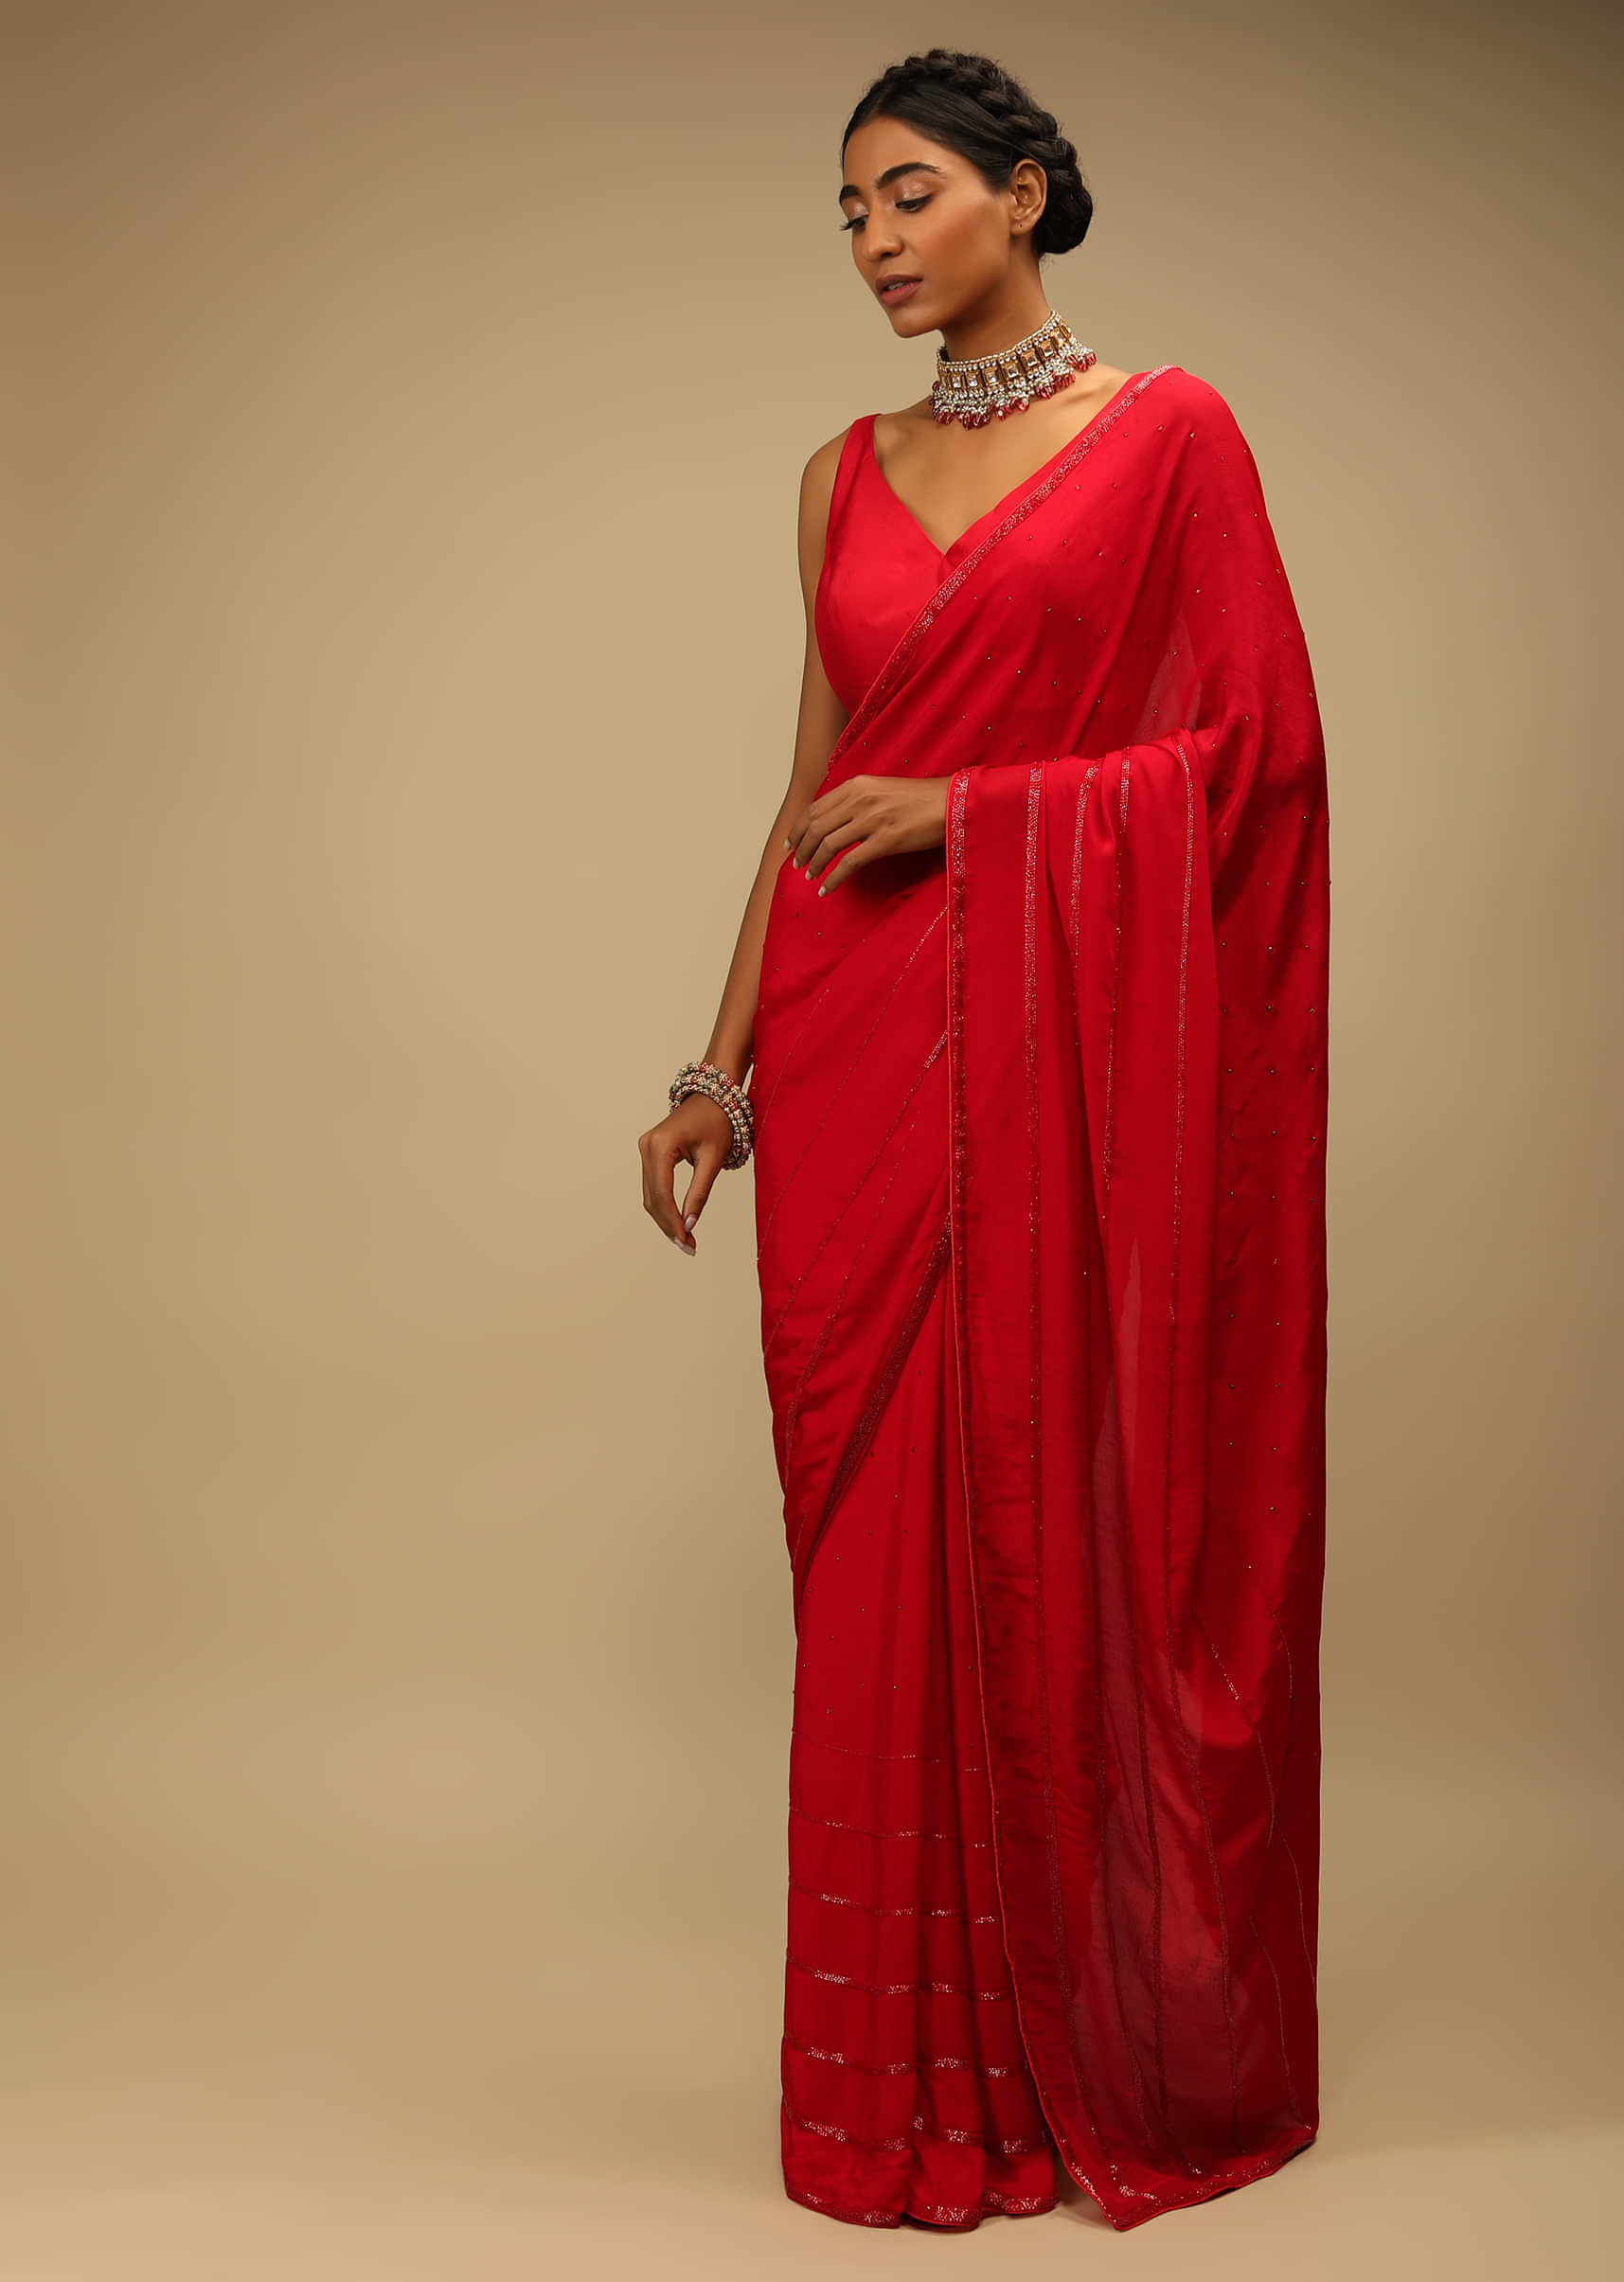 Red Saree In Chiffon With Cut Dana Embroidered Stripes And Kundan Work 